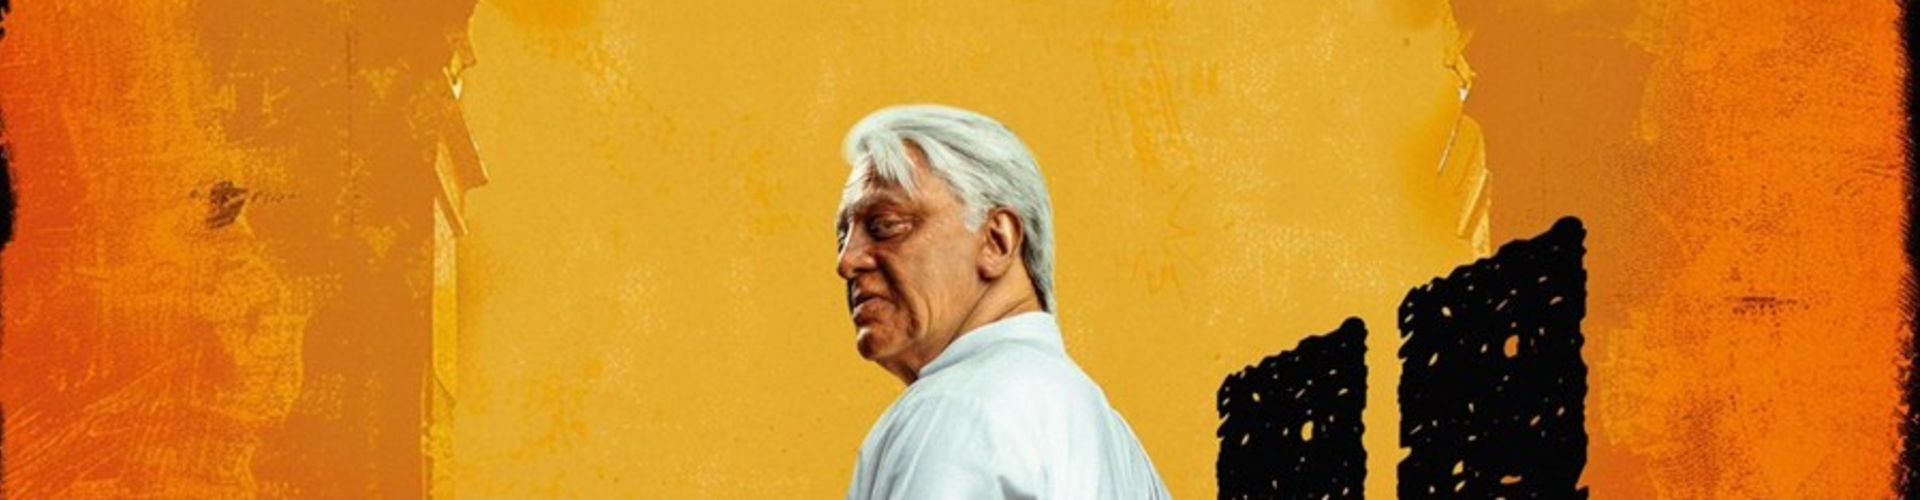 Kamal Haasan Unveils New Poster and Release Date for "Indian 2"